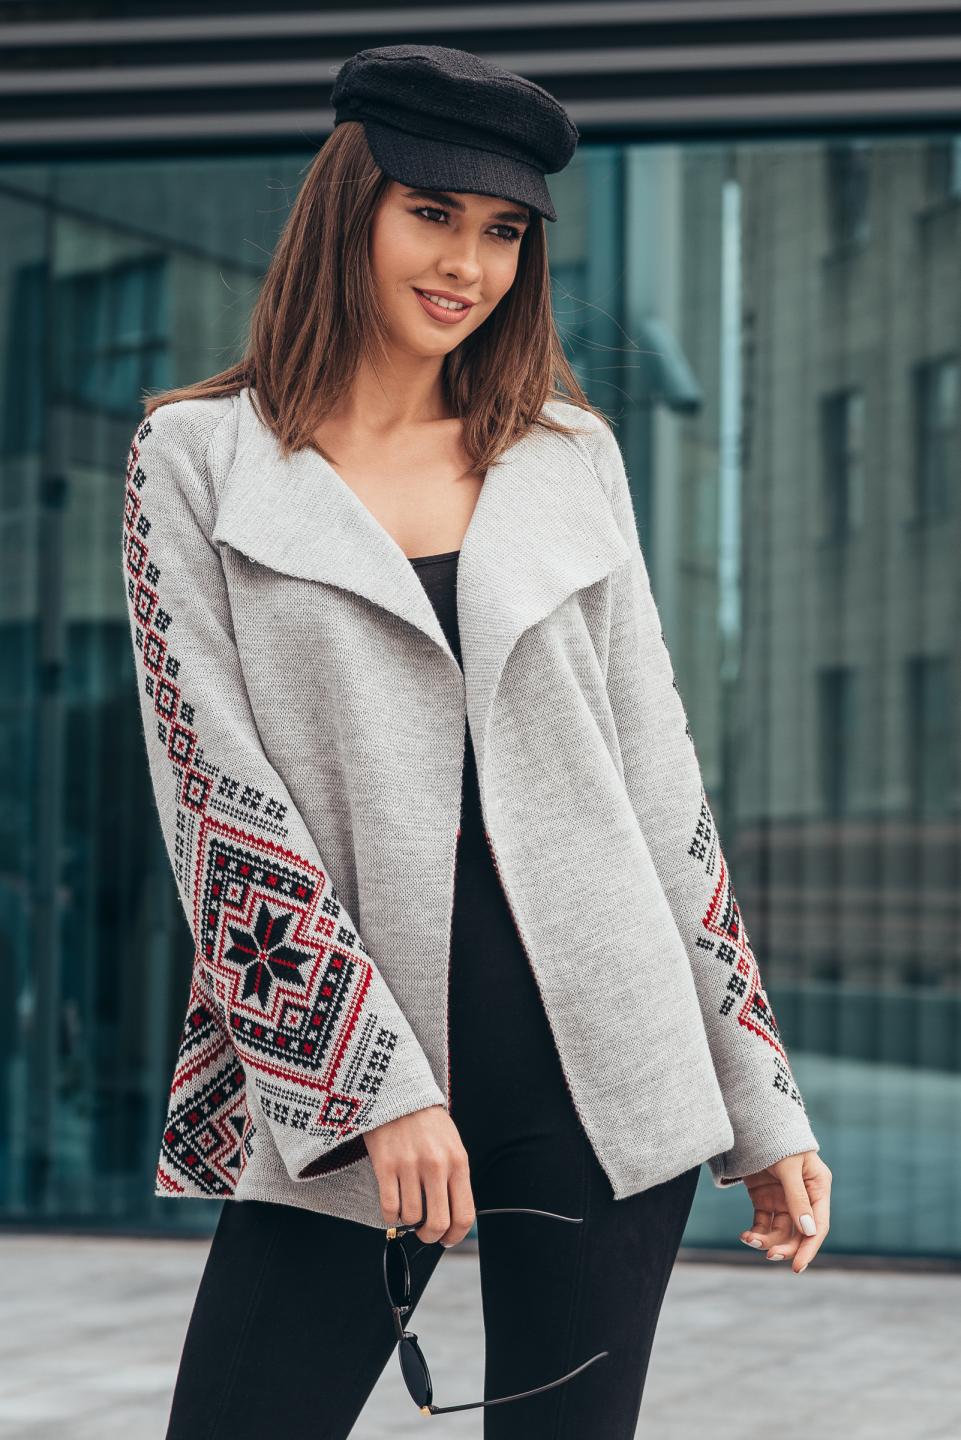 Knitted jacket in ethnic style &quot;Krystyna&quot; (light gray, black, scarlet)